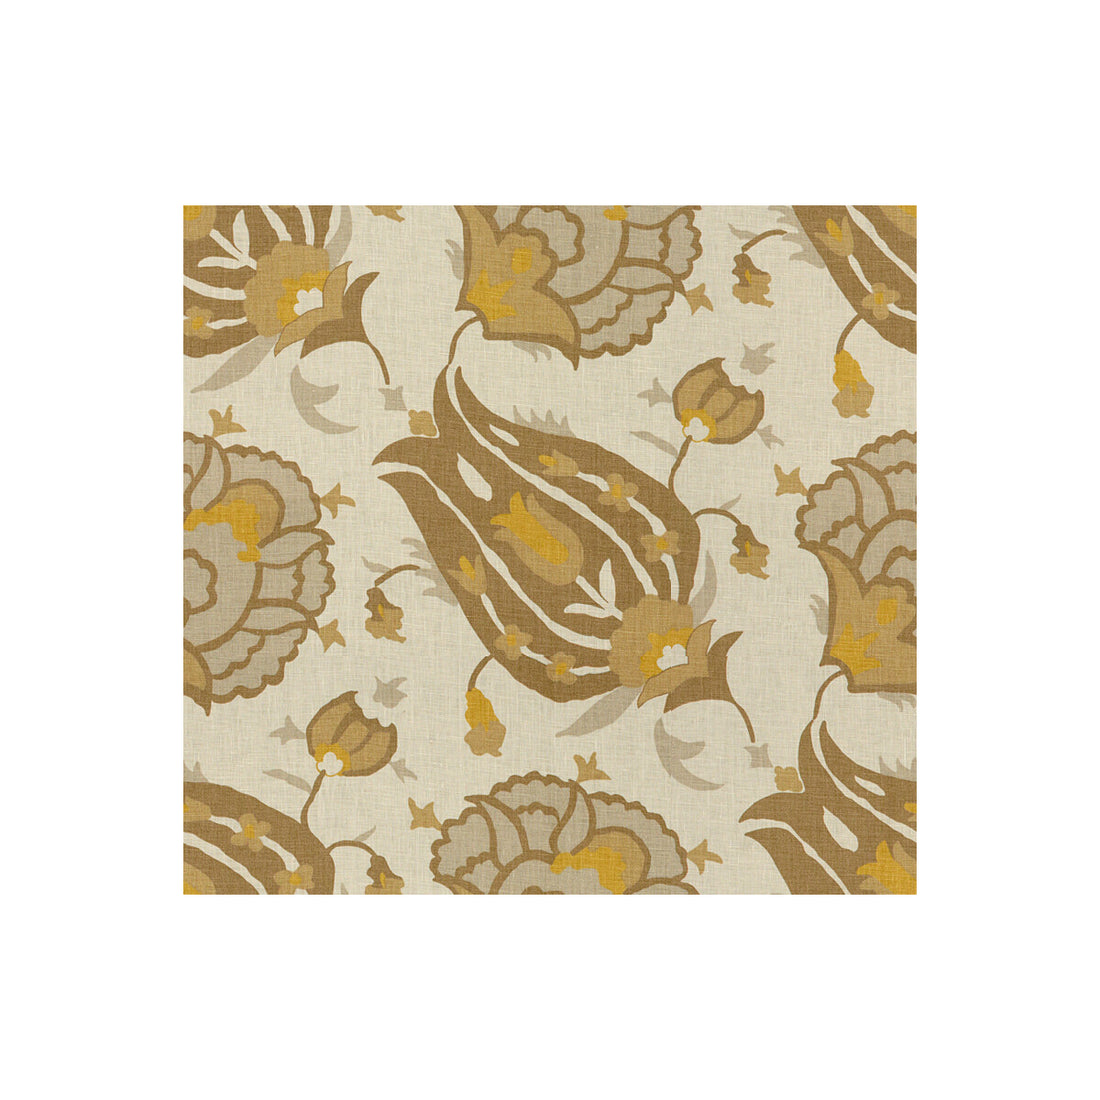 Turkish Flower fabric in grey/bronze color - pattern GWF-3319.640.0 - by Lee Jofa Modern in the David Hicks 3 By Ashley Hicks collection